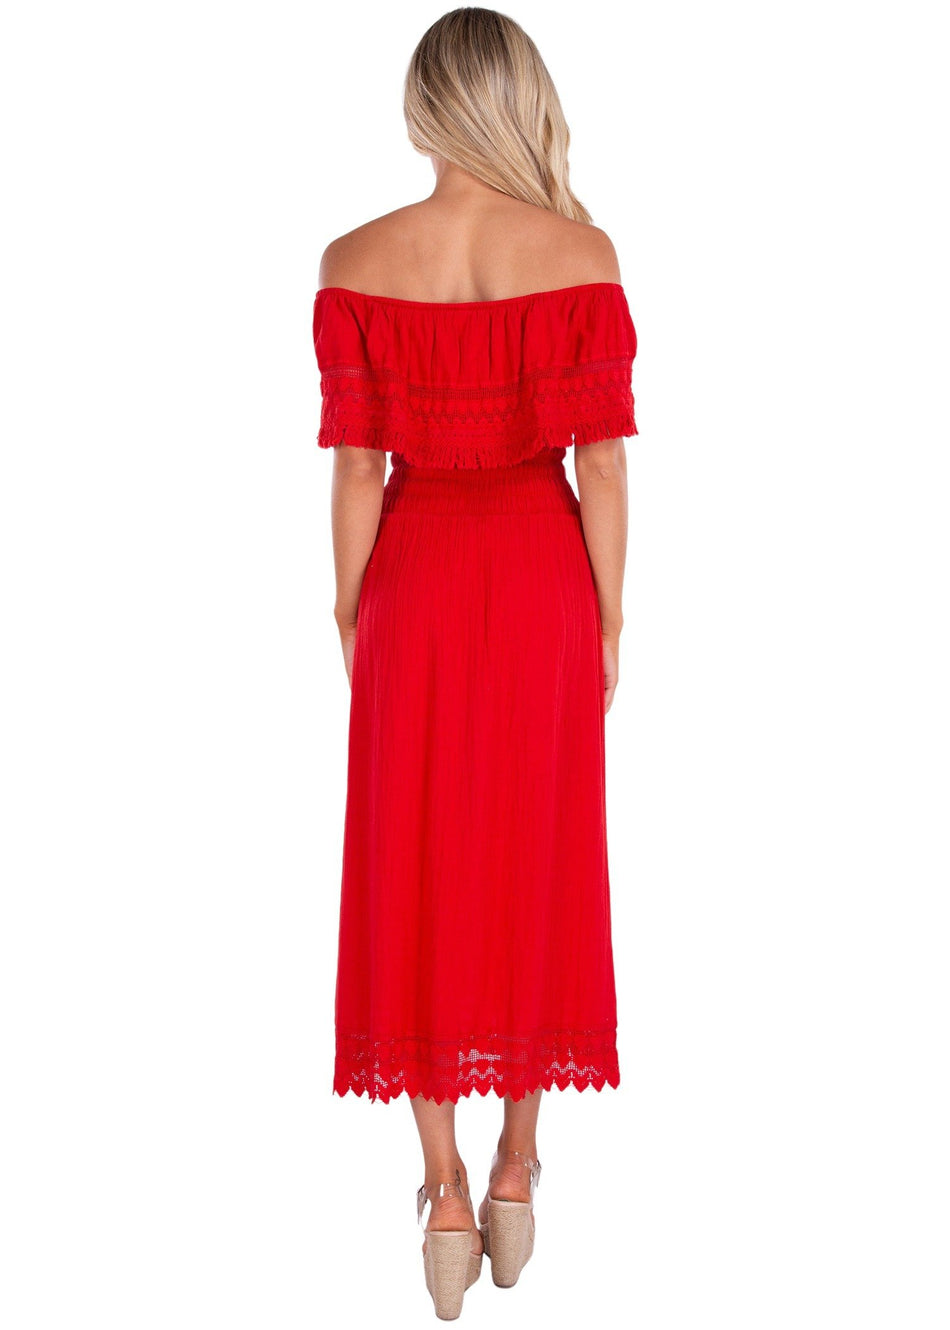 NW1079 - Red Cotton Dress